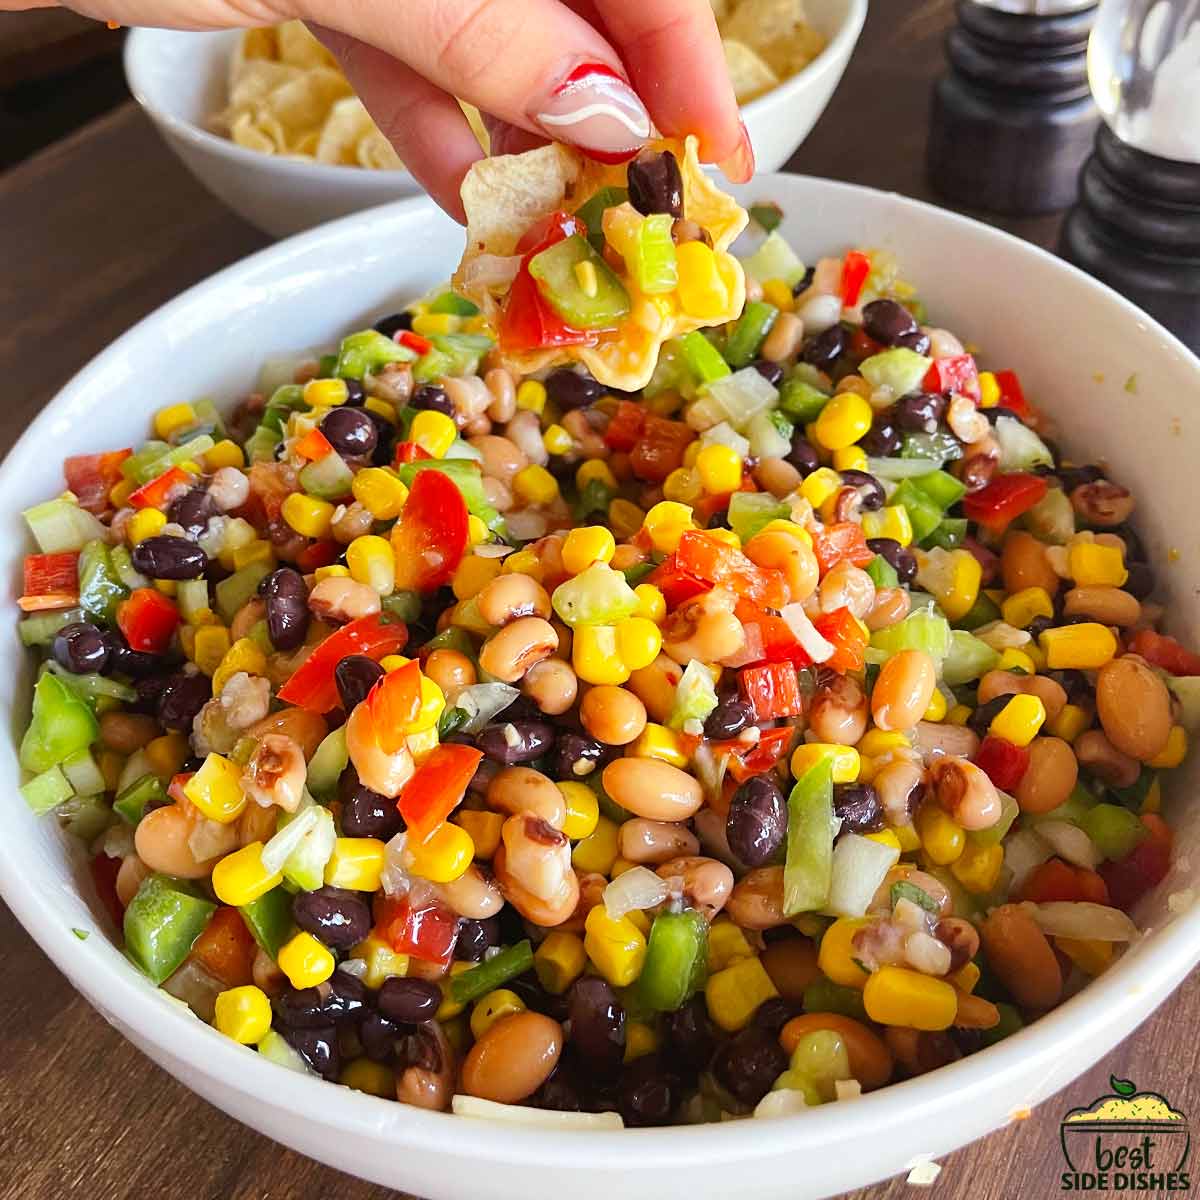 Dipping a chip in black eyed peas salad